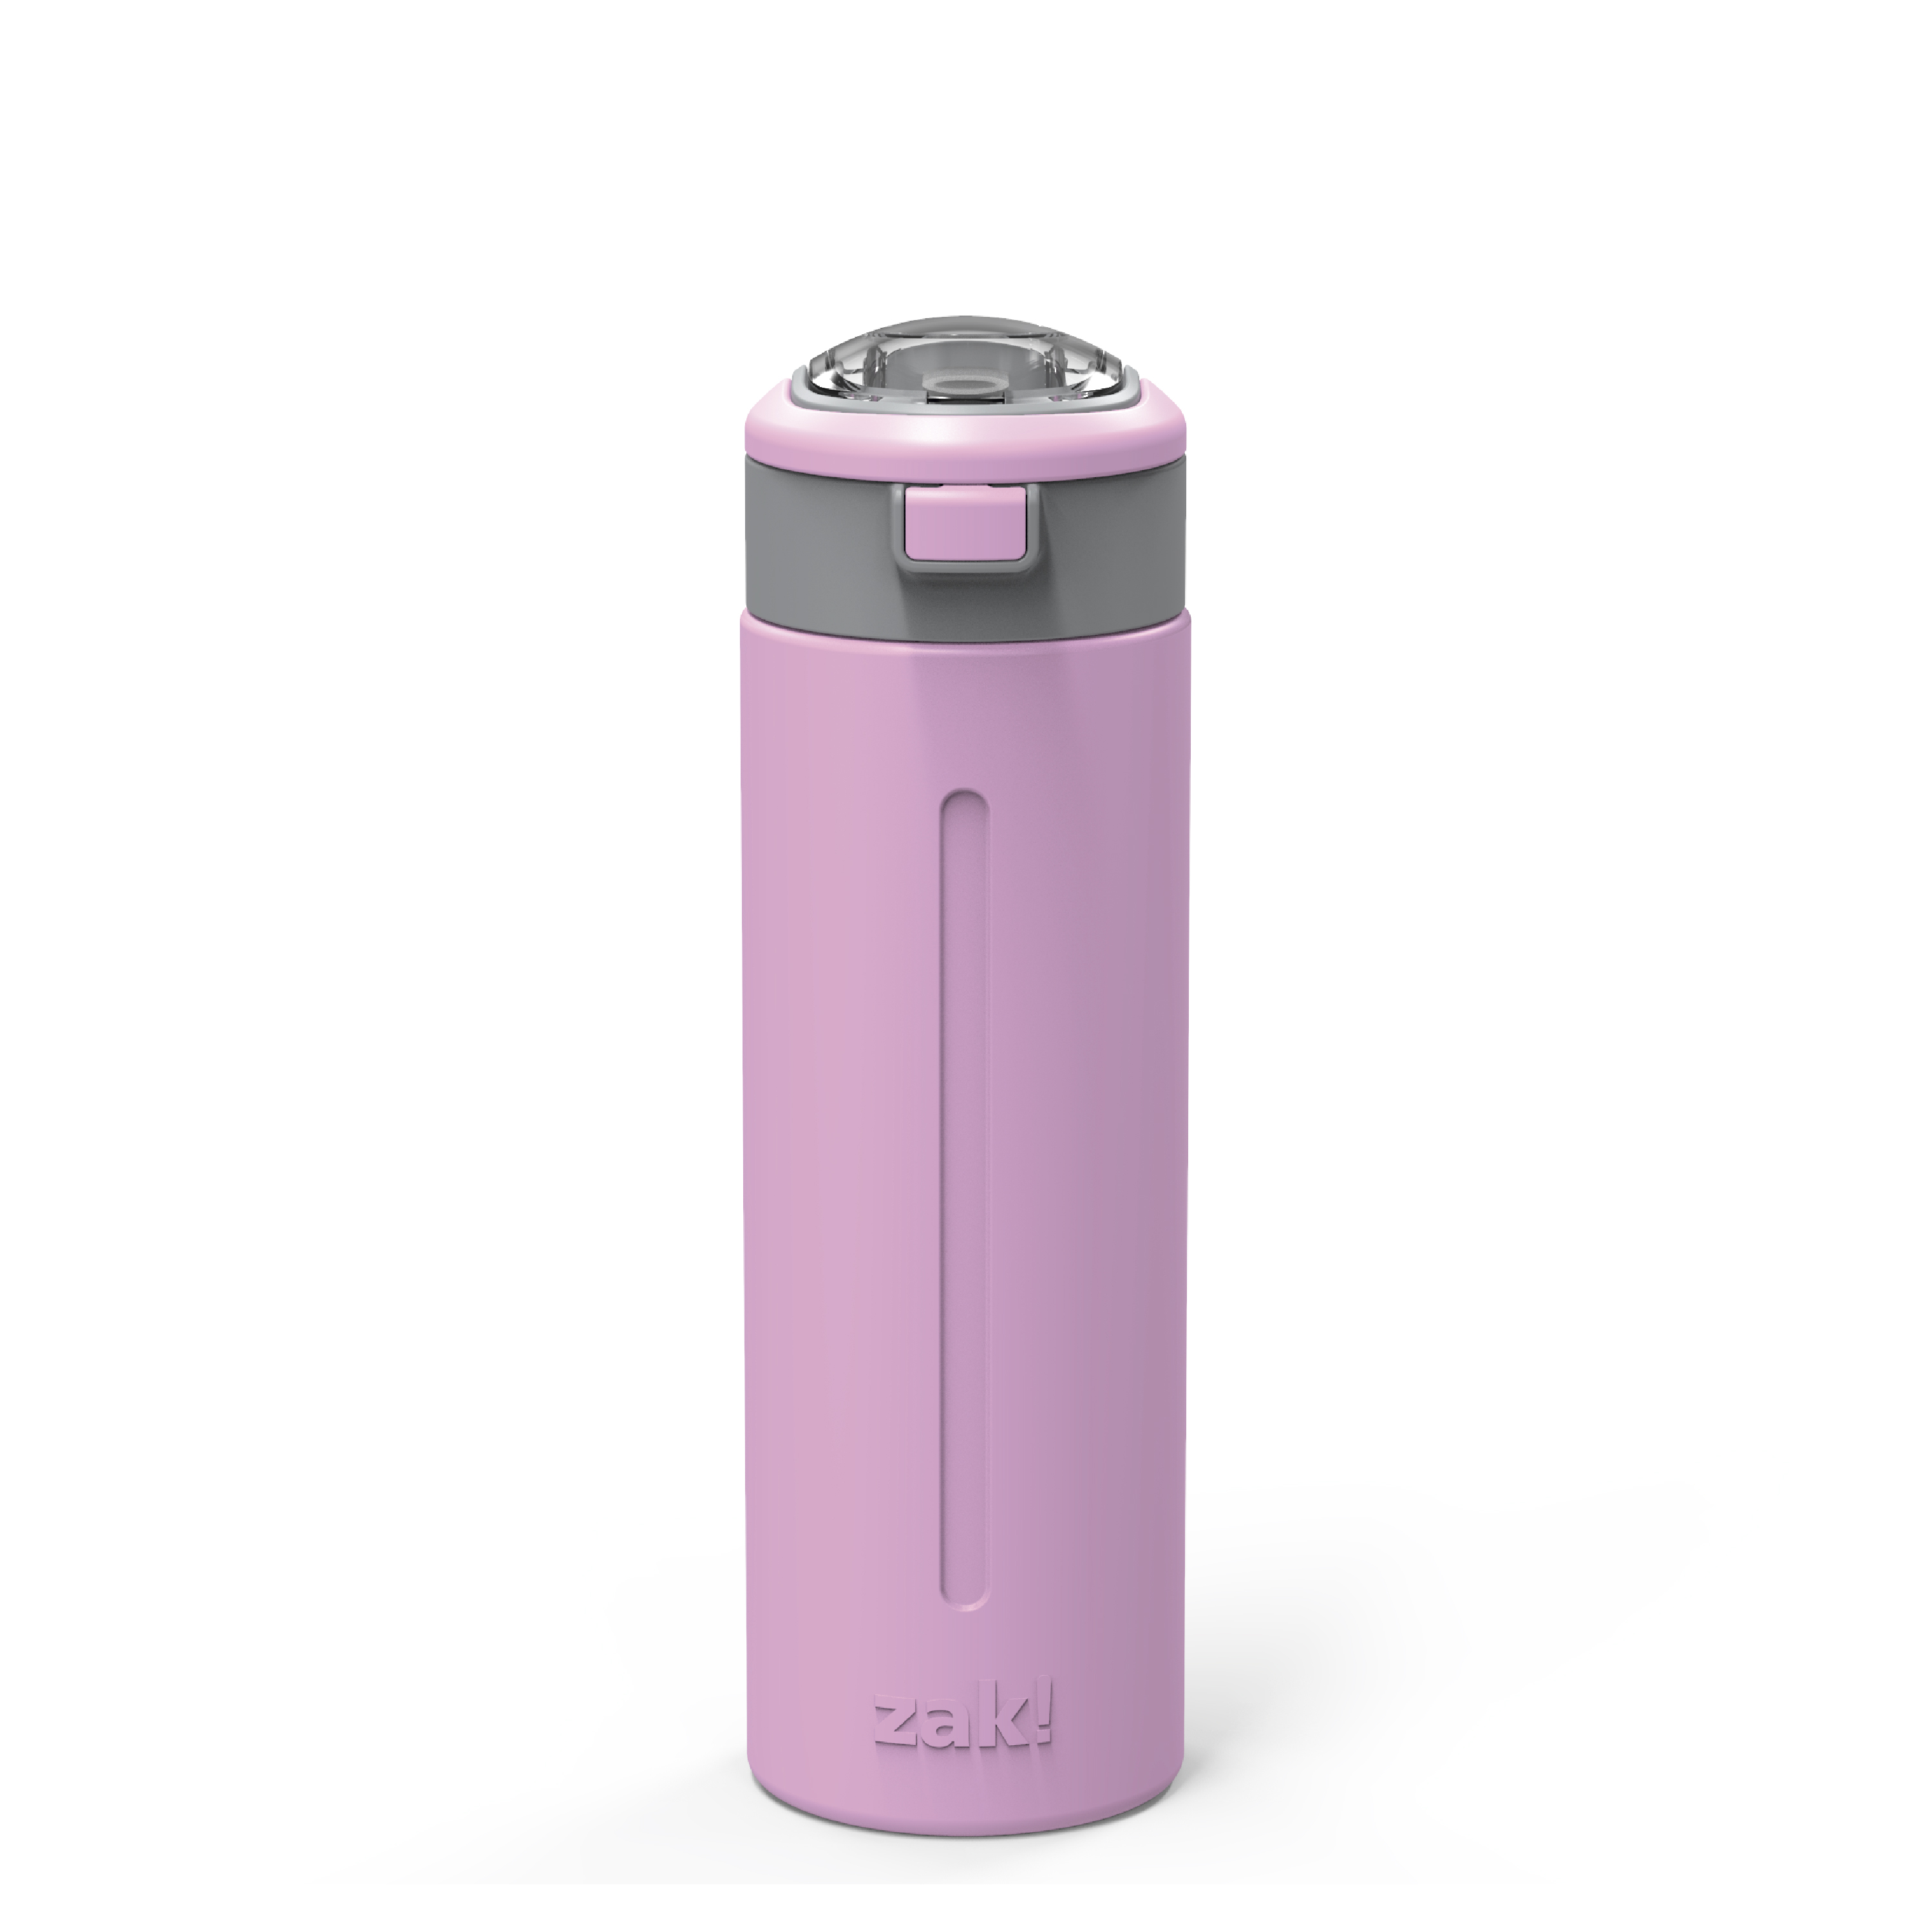 Genesis 24 ounce Vacuum Insulated Stainless Steel Water Bottle, Lilac slideshow image 1